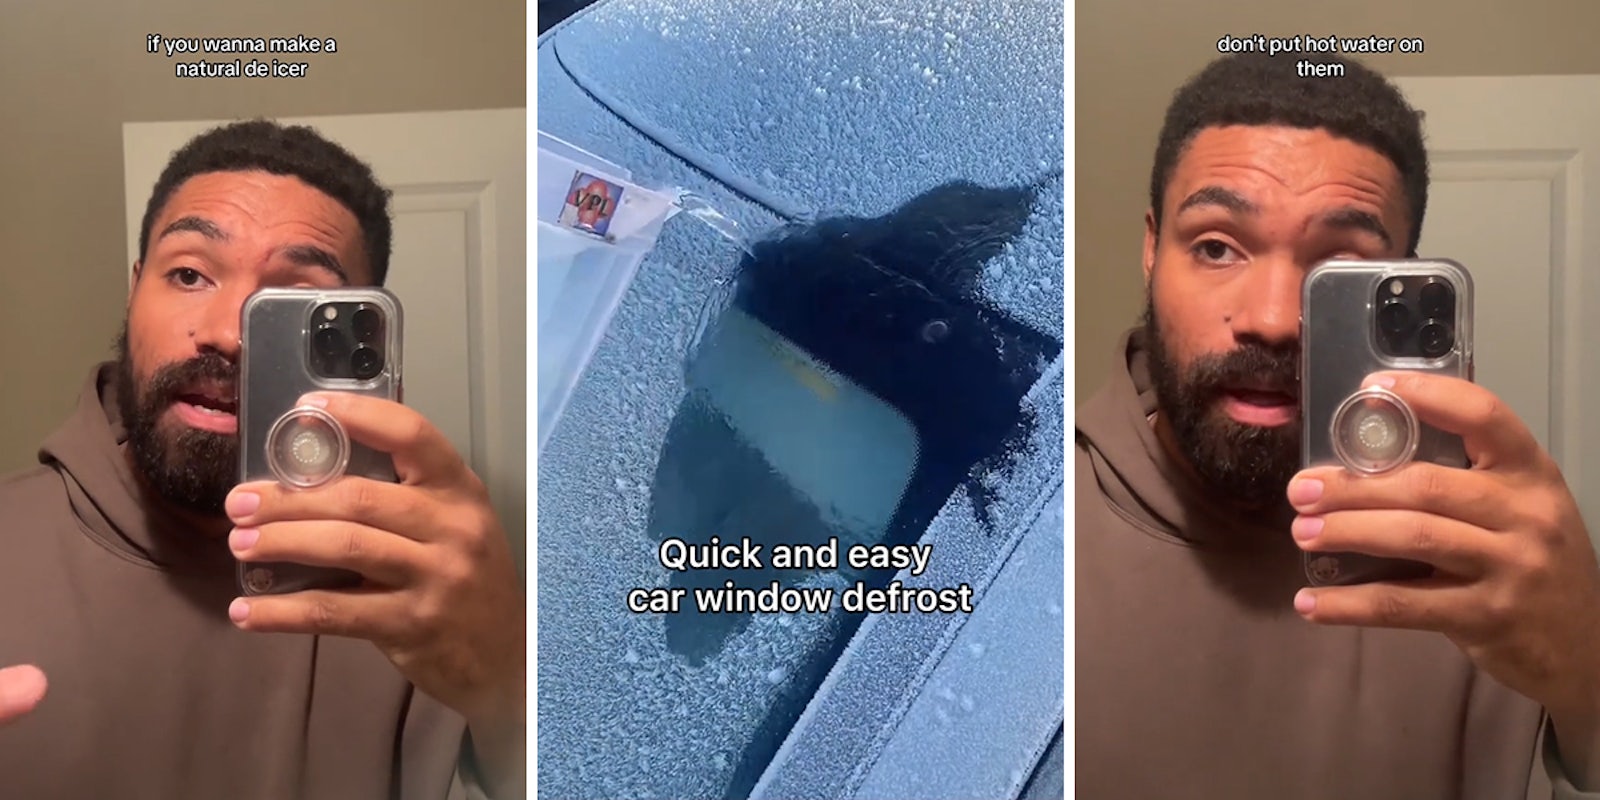 man speaking in mirror with caption 'if you wanna make a natural de icer' (l) car windshield with water being poured over ice with caption 'Quick and easy car window defrost' (c) man speaking in mirror with caption 'don't put hot water on them' (r)